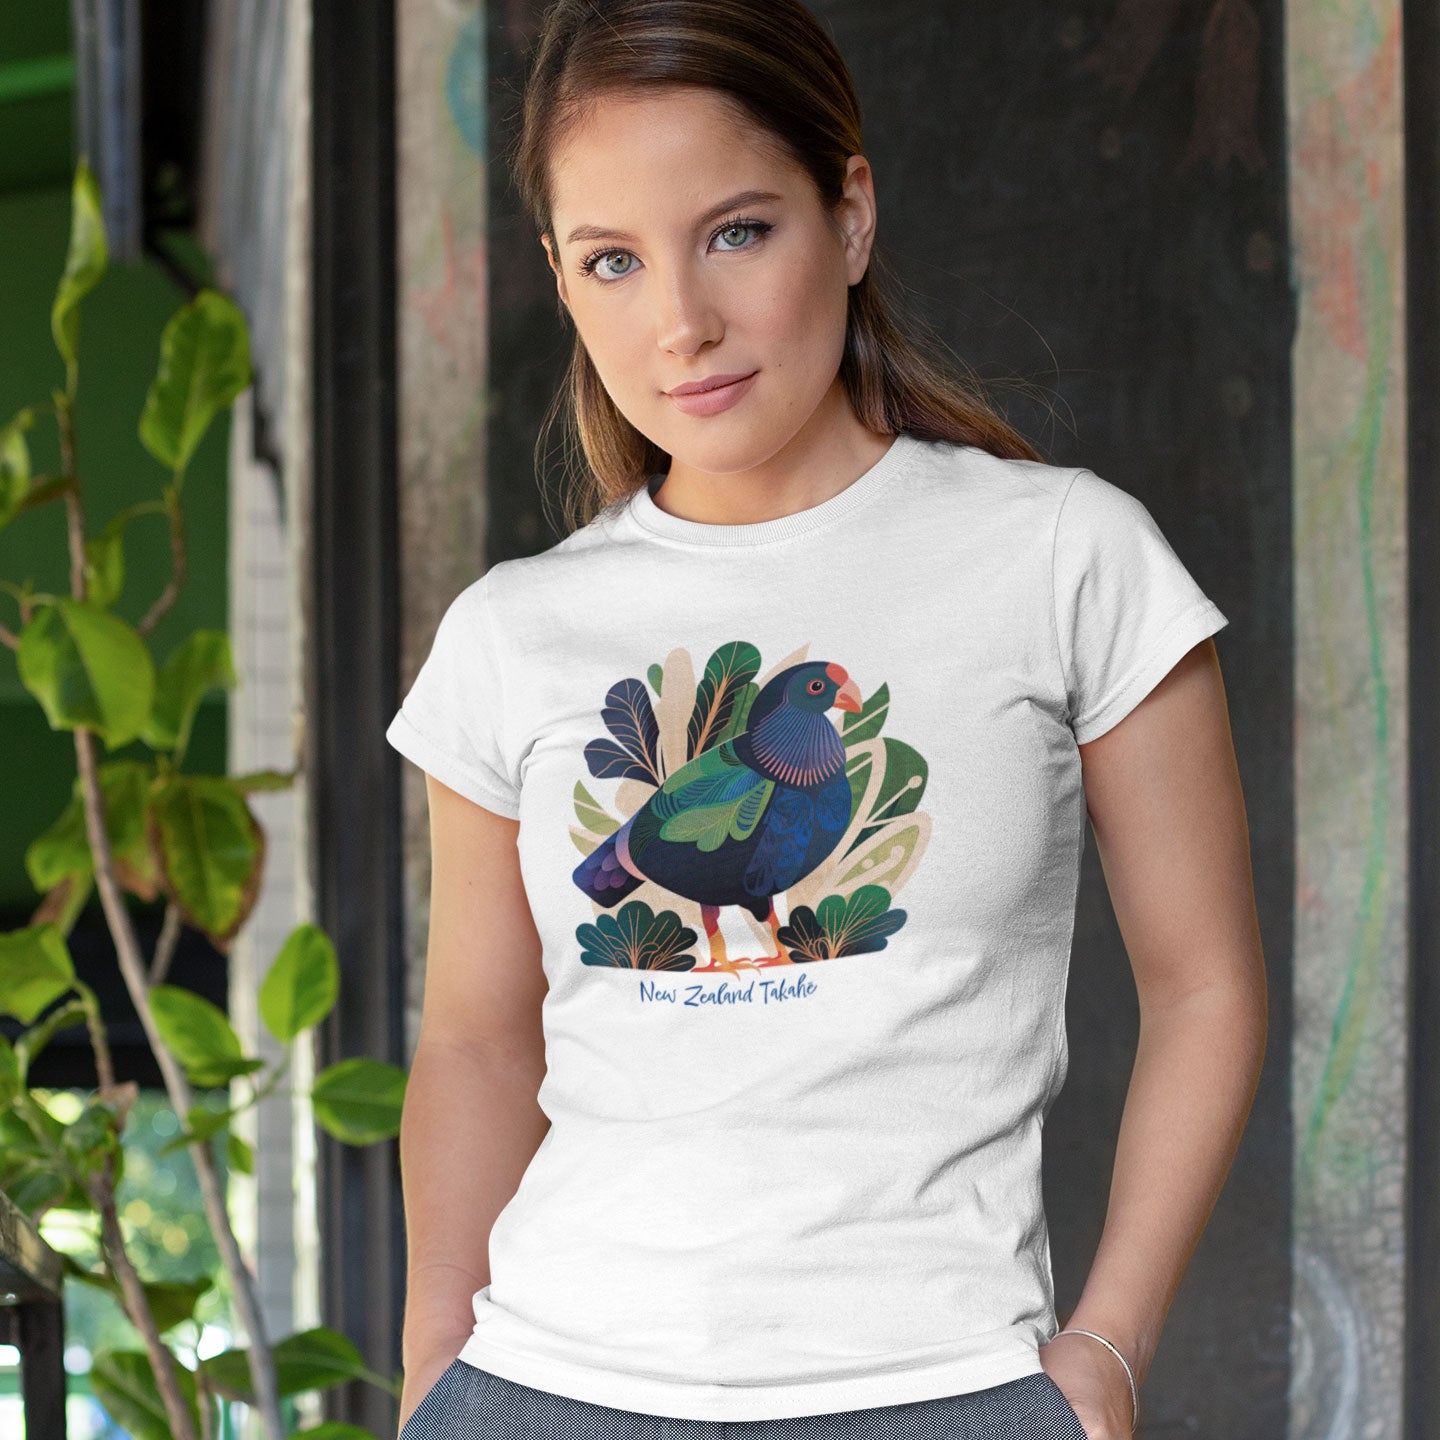 A woman wearing a white t-shirt with a new zealand takahe print